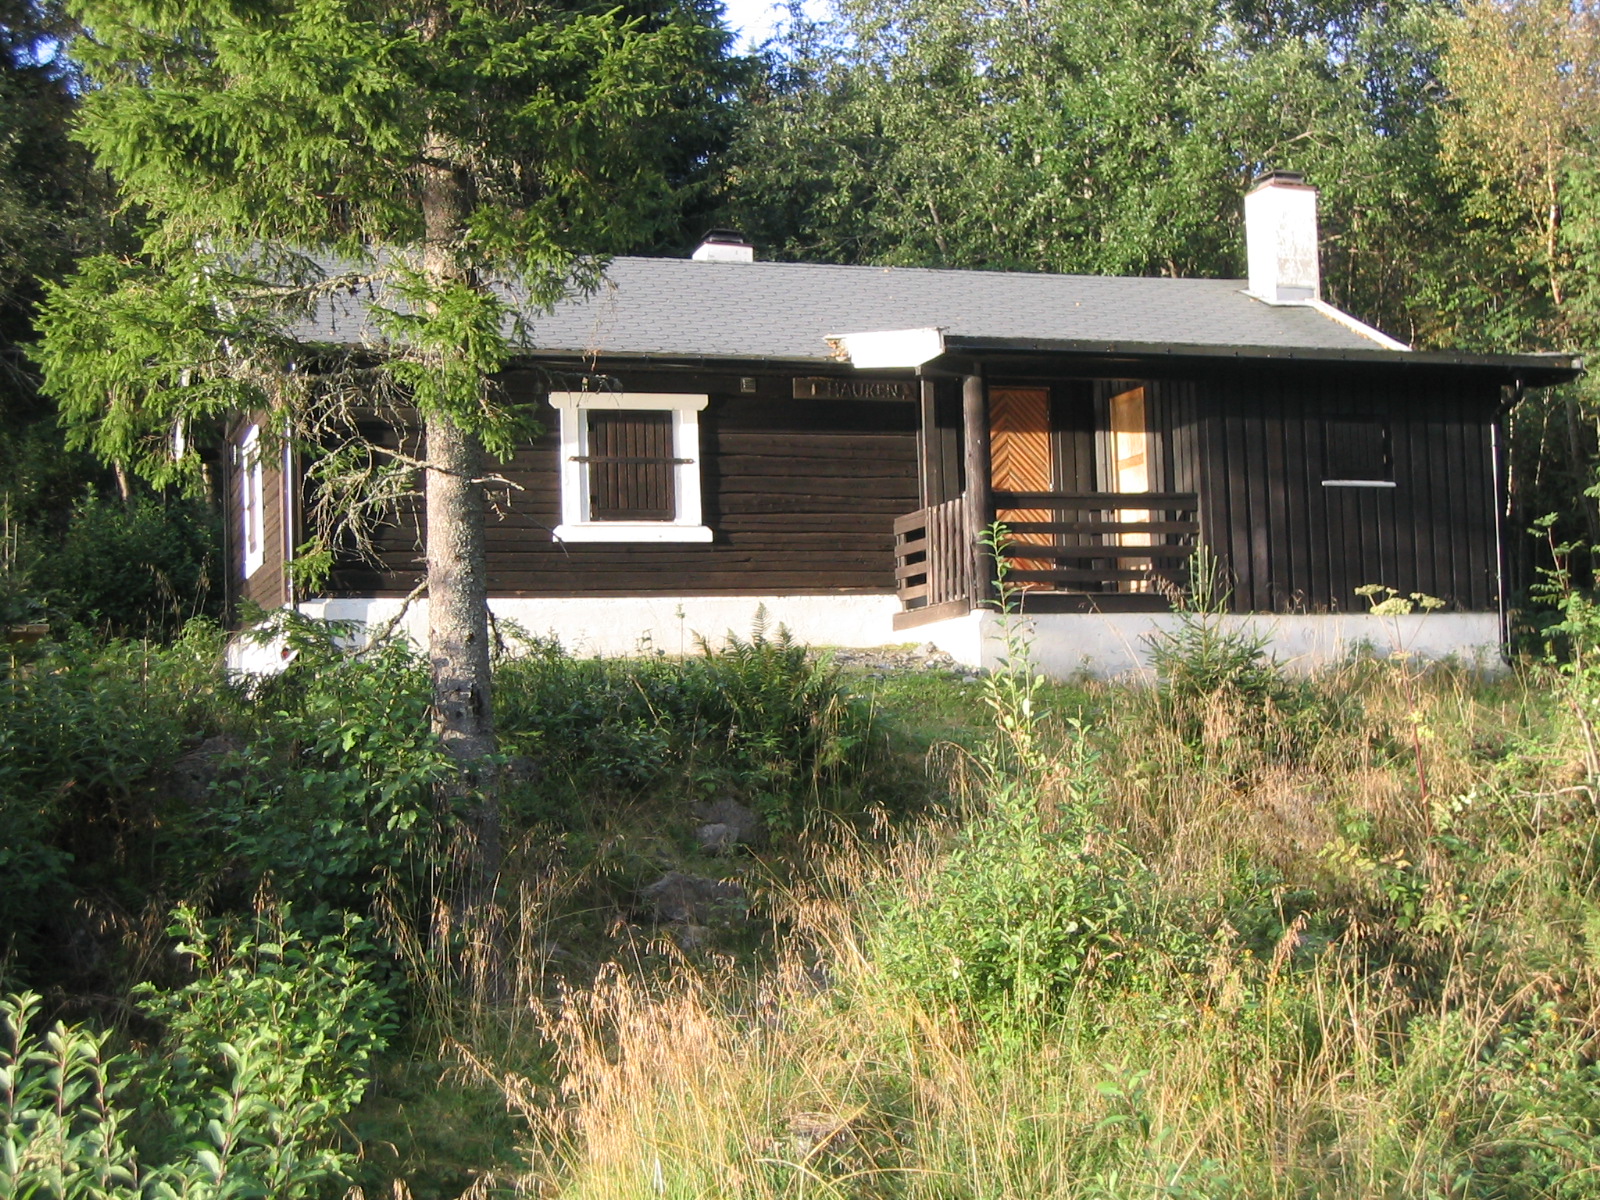 the cabin is brown with black siding and red doors